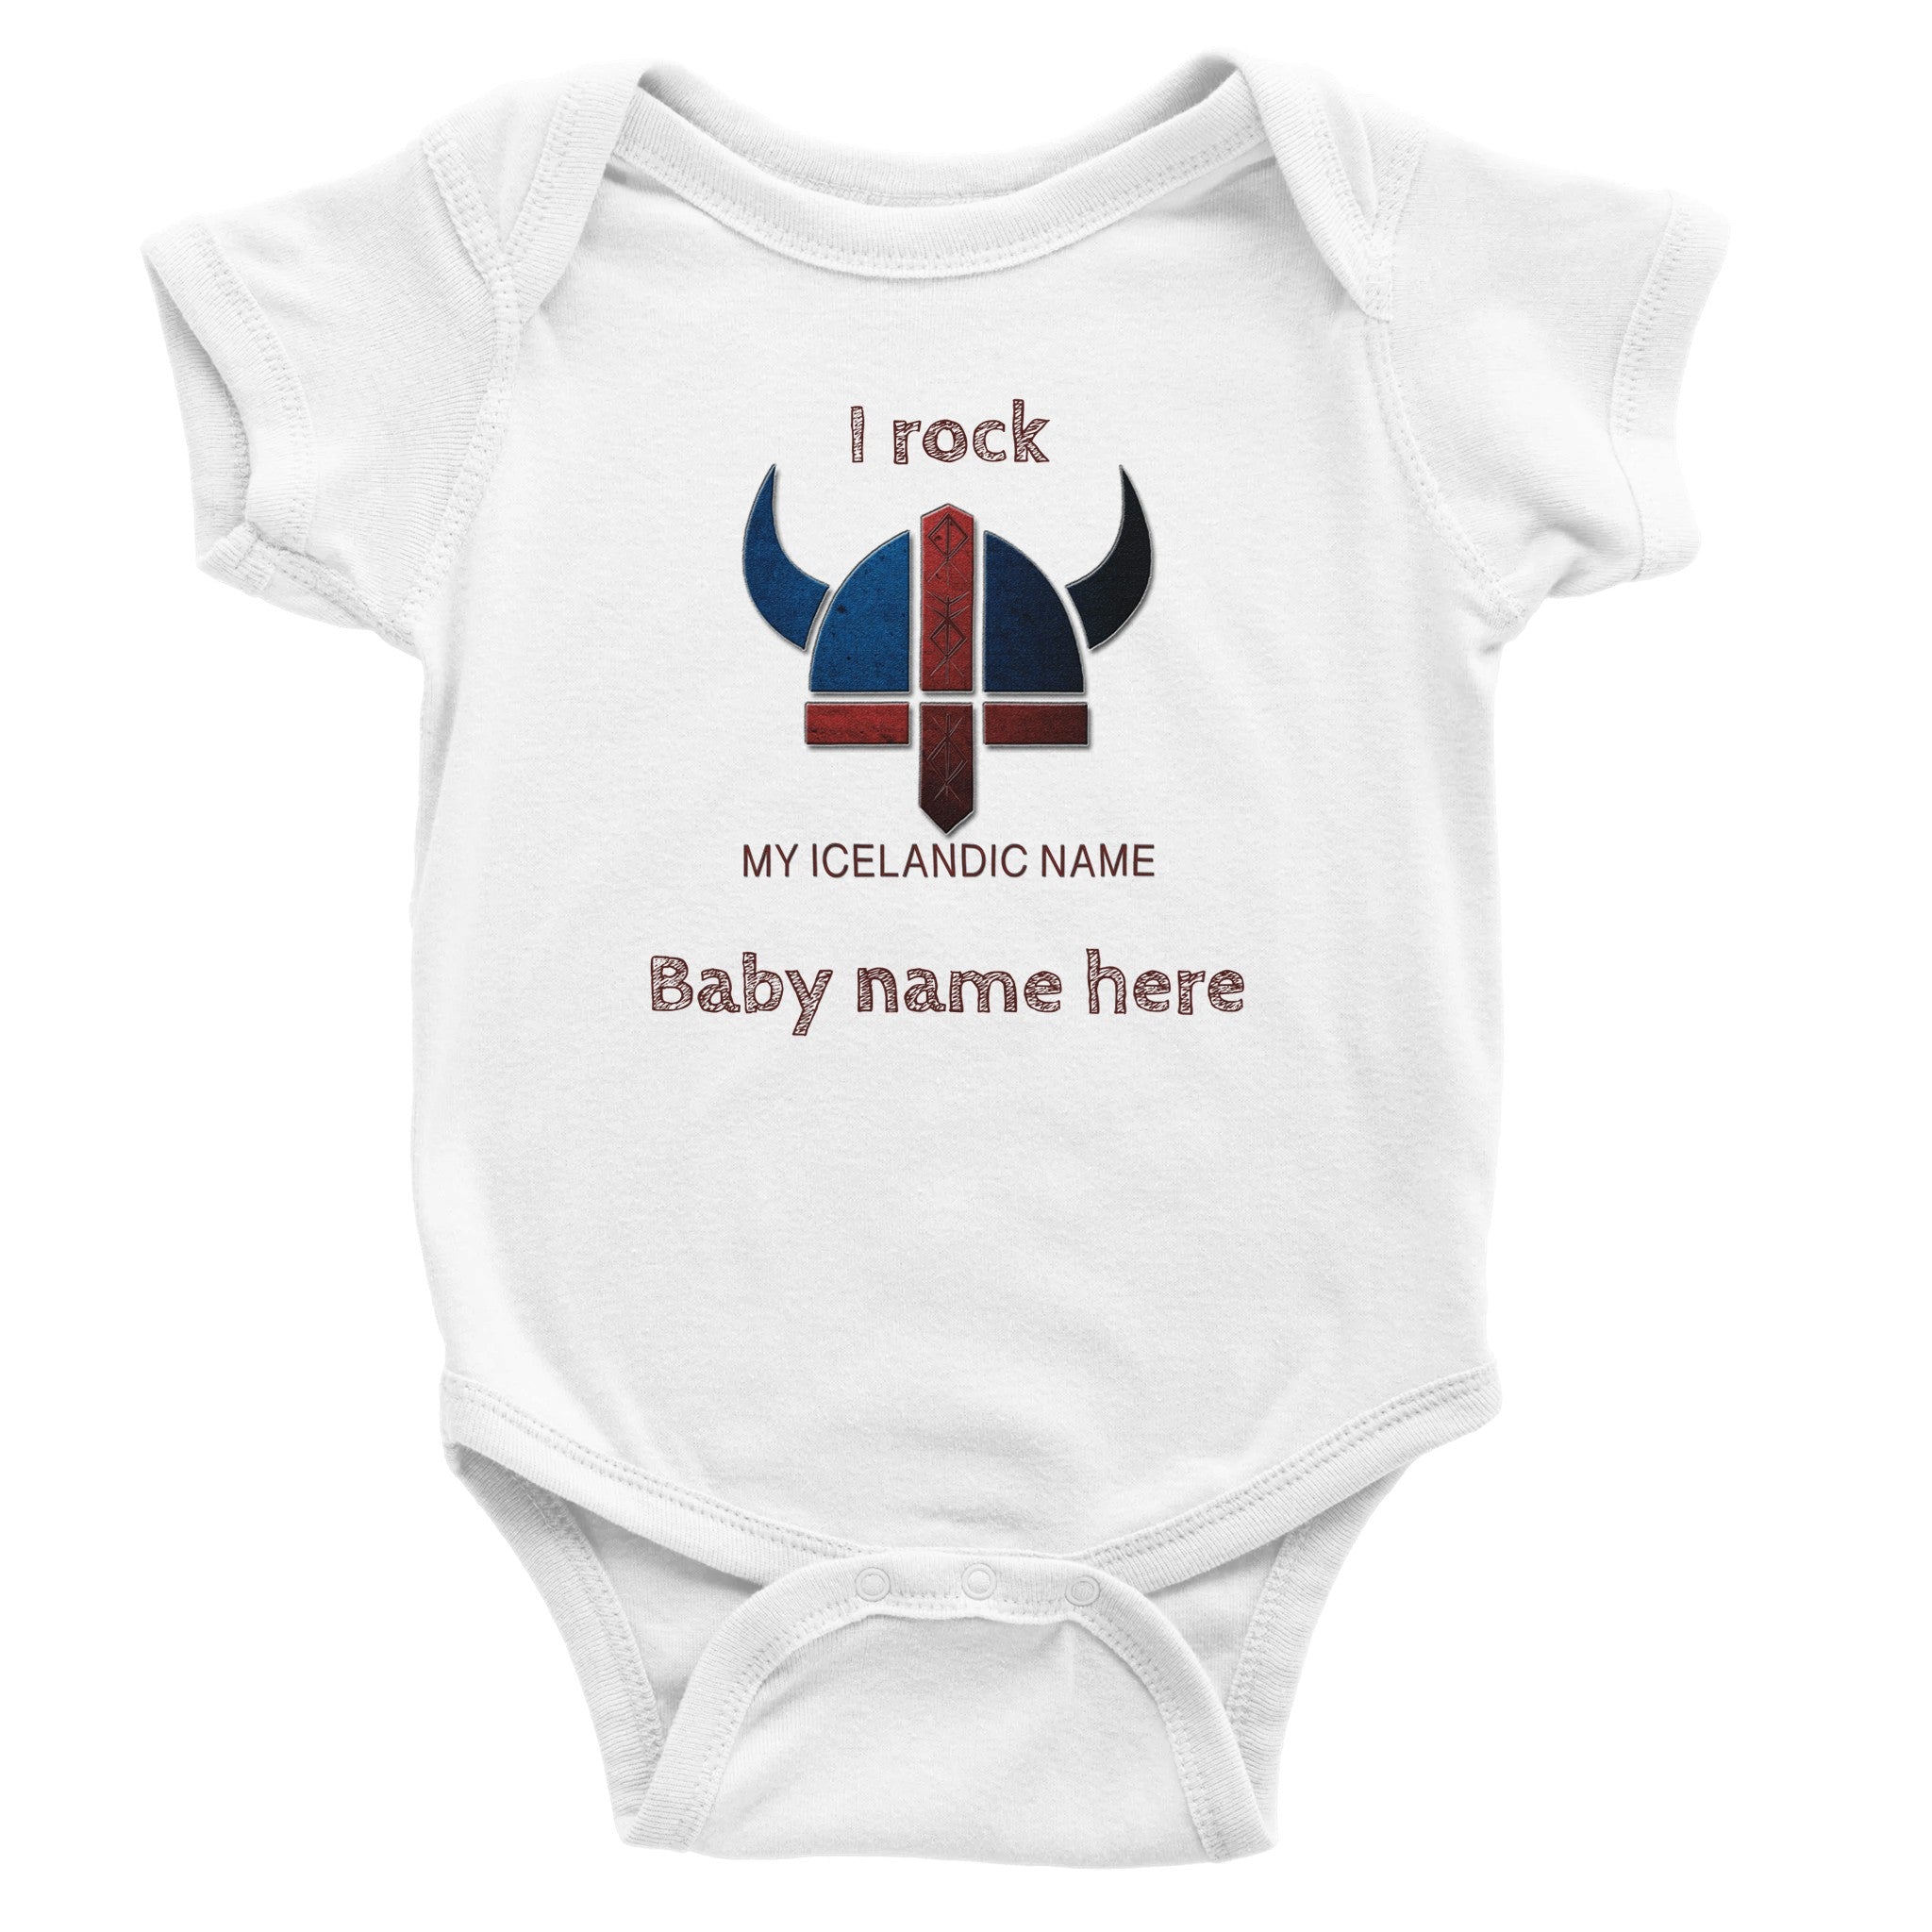 White Custom baby bodysuit, 'I Rock' with name, short sleeves d428cee9-c7a3-4b84-81a8-8777212c161a